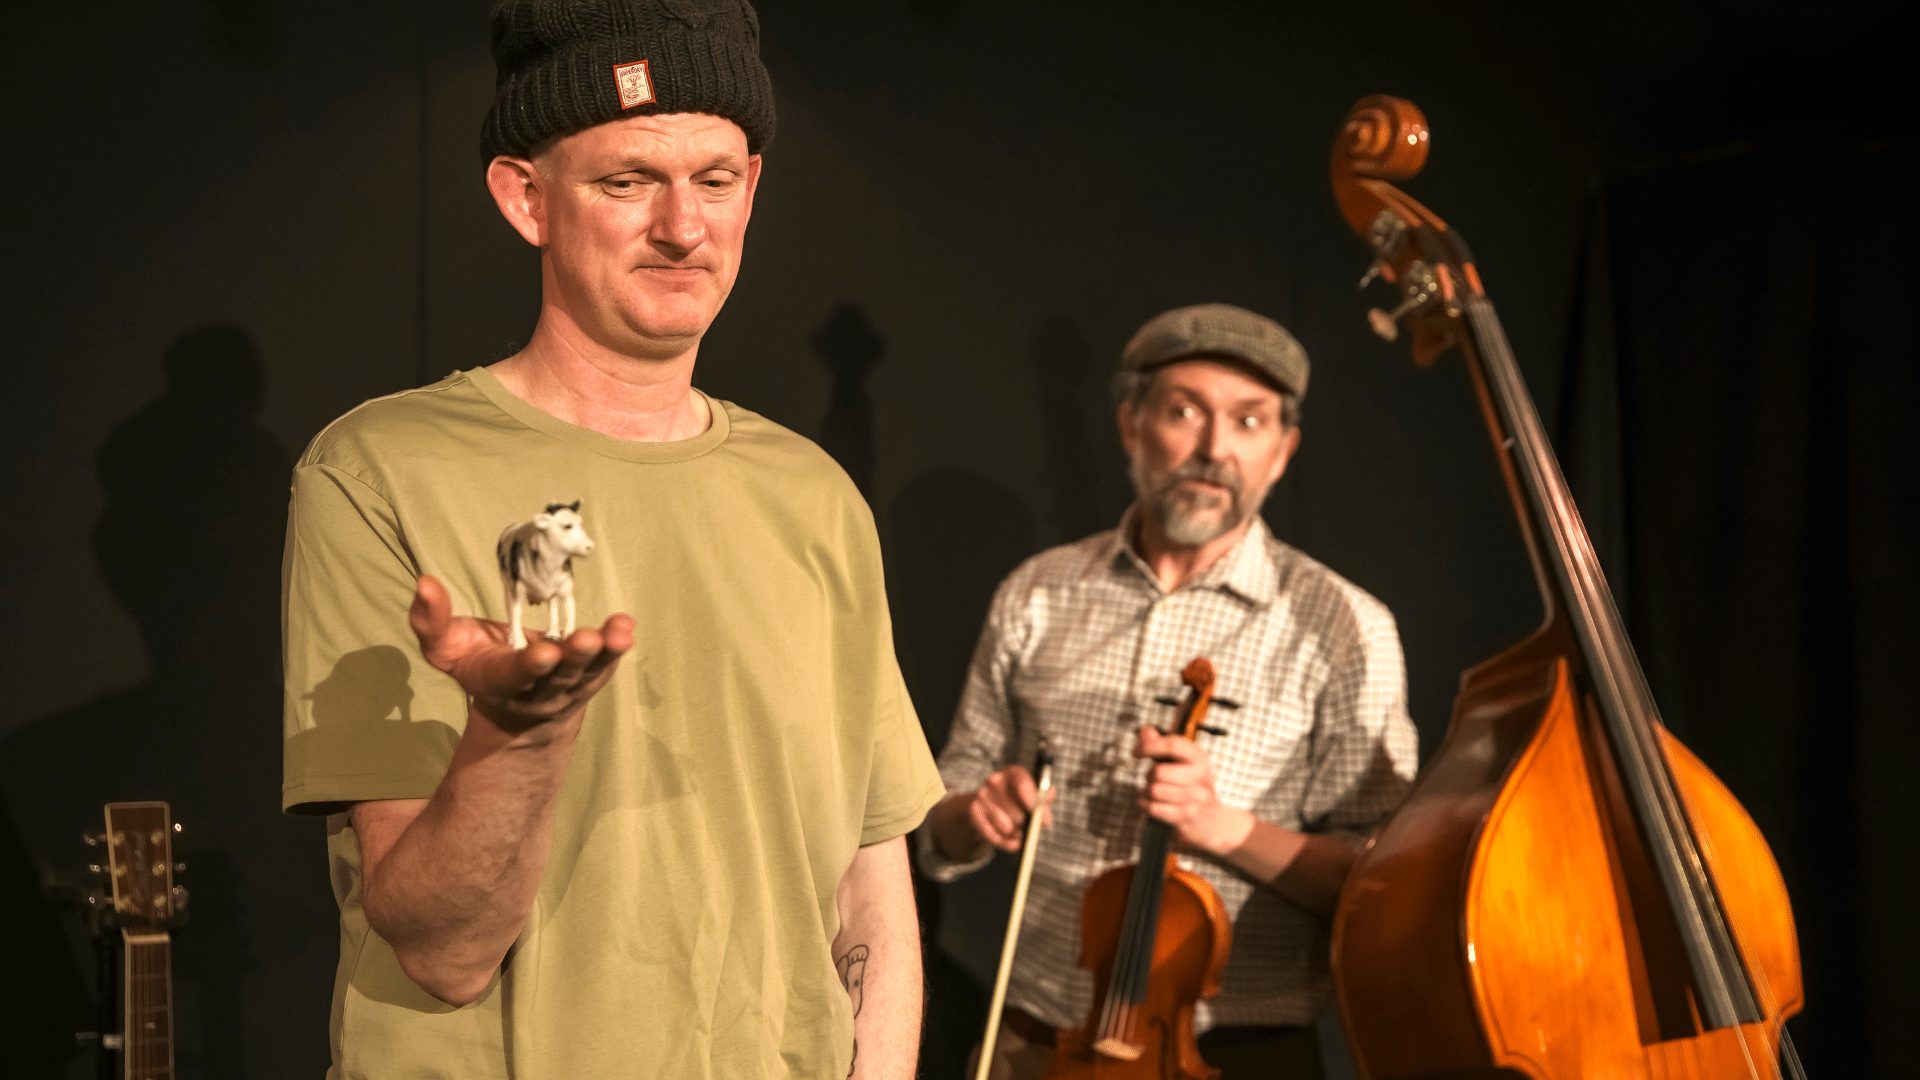 One Man and His Cow production photo - On the left in the foreground: Stu McLoughlin holding a miniature cow figurine in the palm of his right hand, as he looks down on it. He wears a black beanie hat with his ears sticking out, and a cream coloured t-shirt. In the background, to the right: Ian Harris looks on at Stu while holding a violin in his left hand and the bow in his right hand. To his left, a double-bass is stood up. Ian wears a farmer-style flat cap and a white square-patterned shirt. Background: black stage curtain.